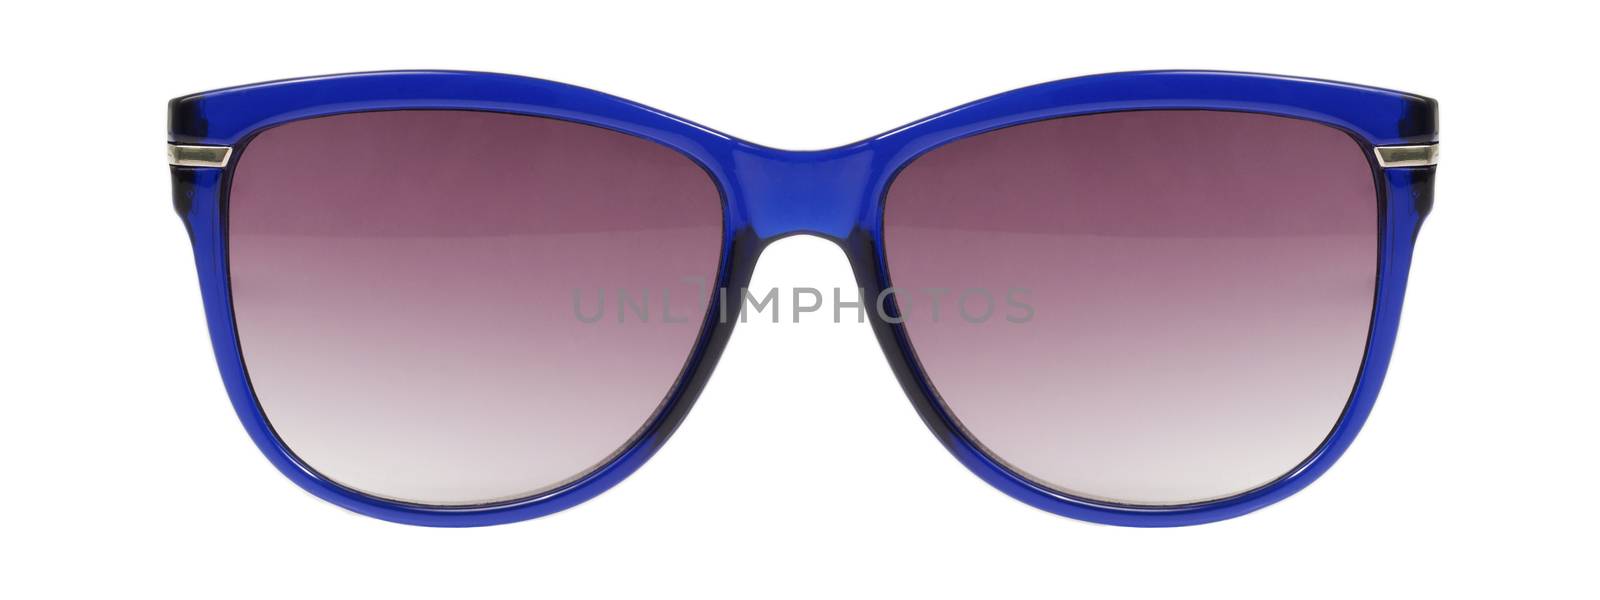 Sunglasses blue frame and red color lens isolated against a clean white background nobody